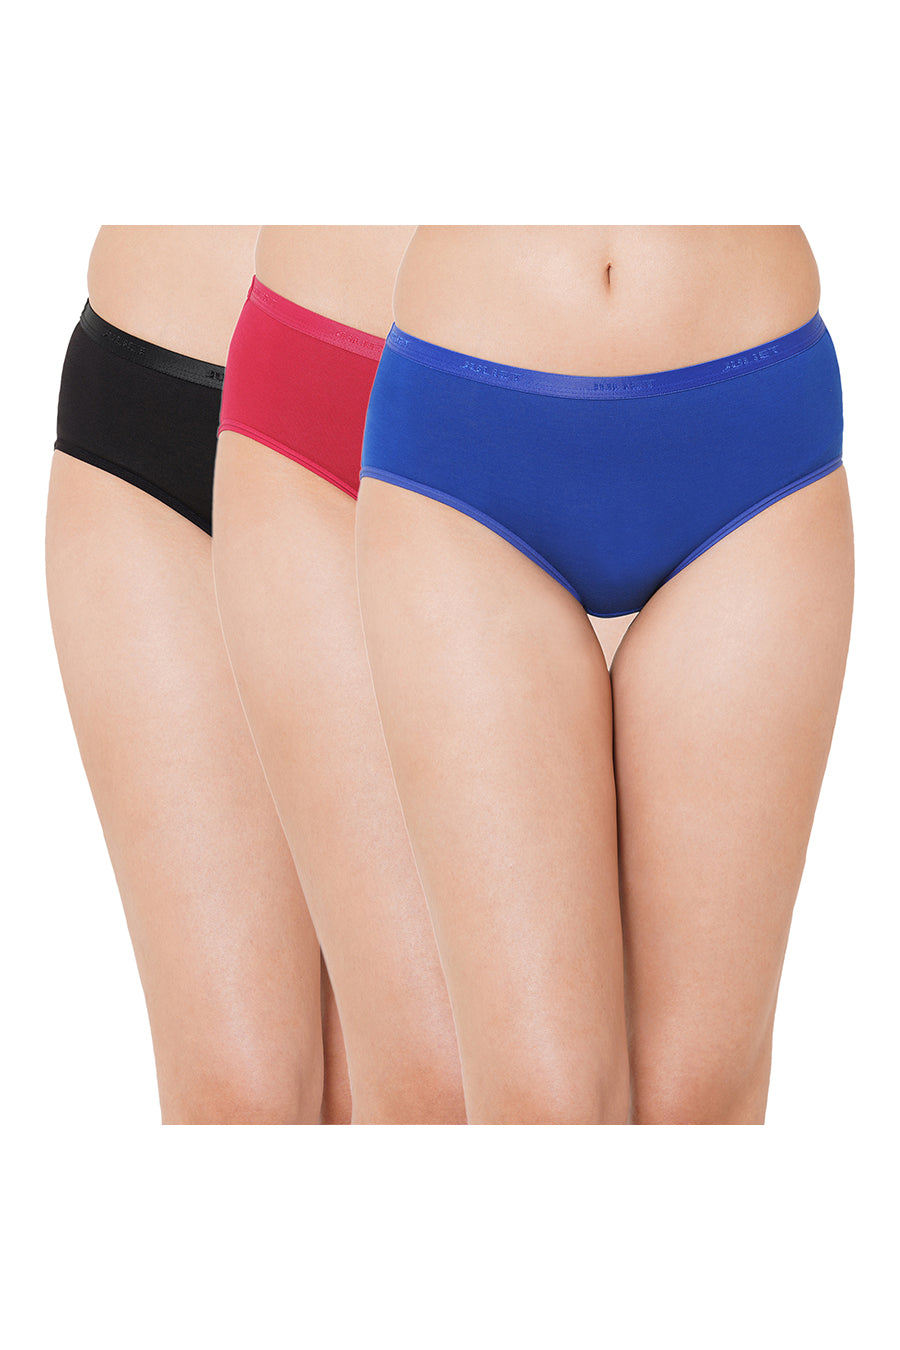 Bodycare Women Cotton Seamfree 3pcs Panty Pack In Assorted Colors